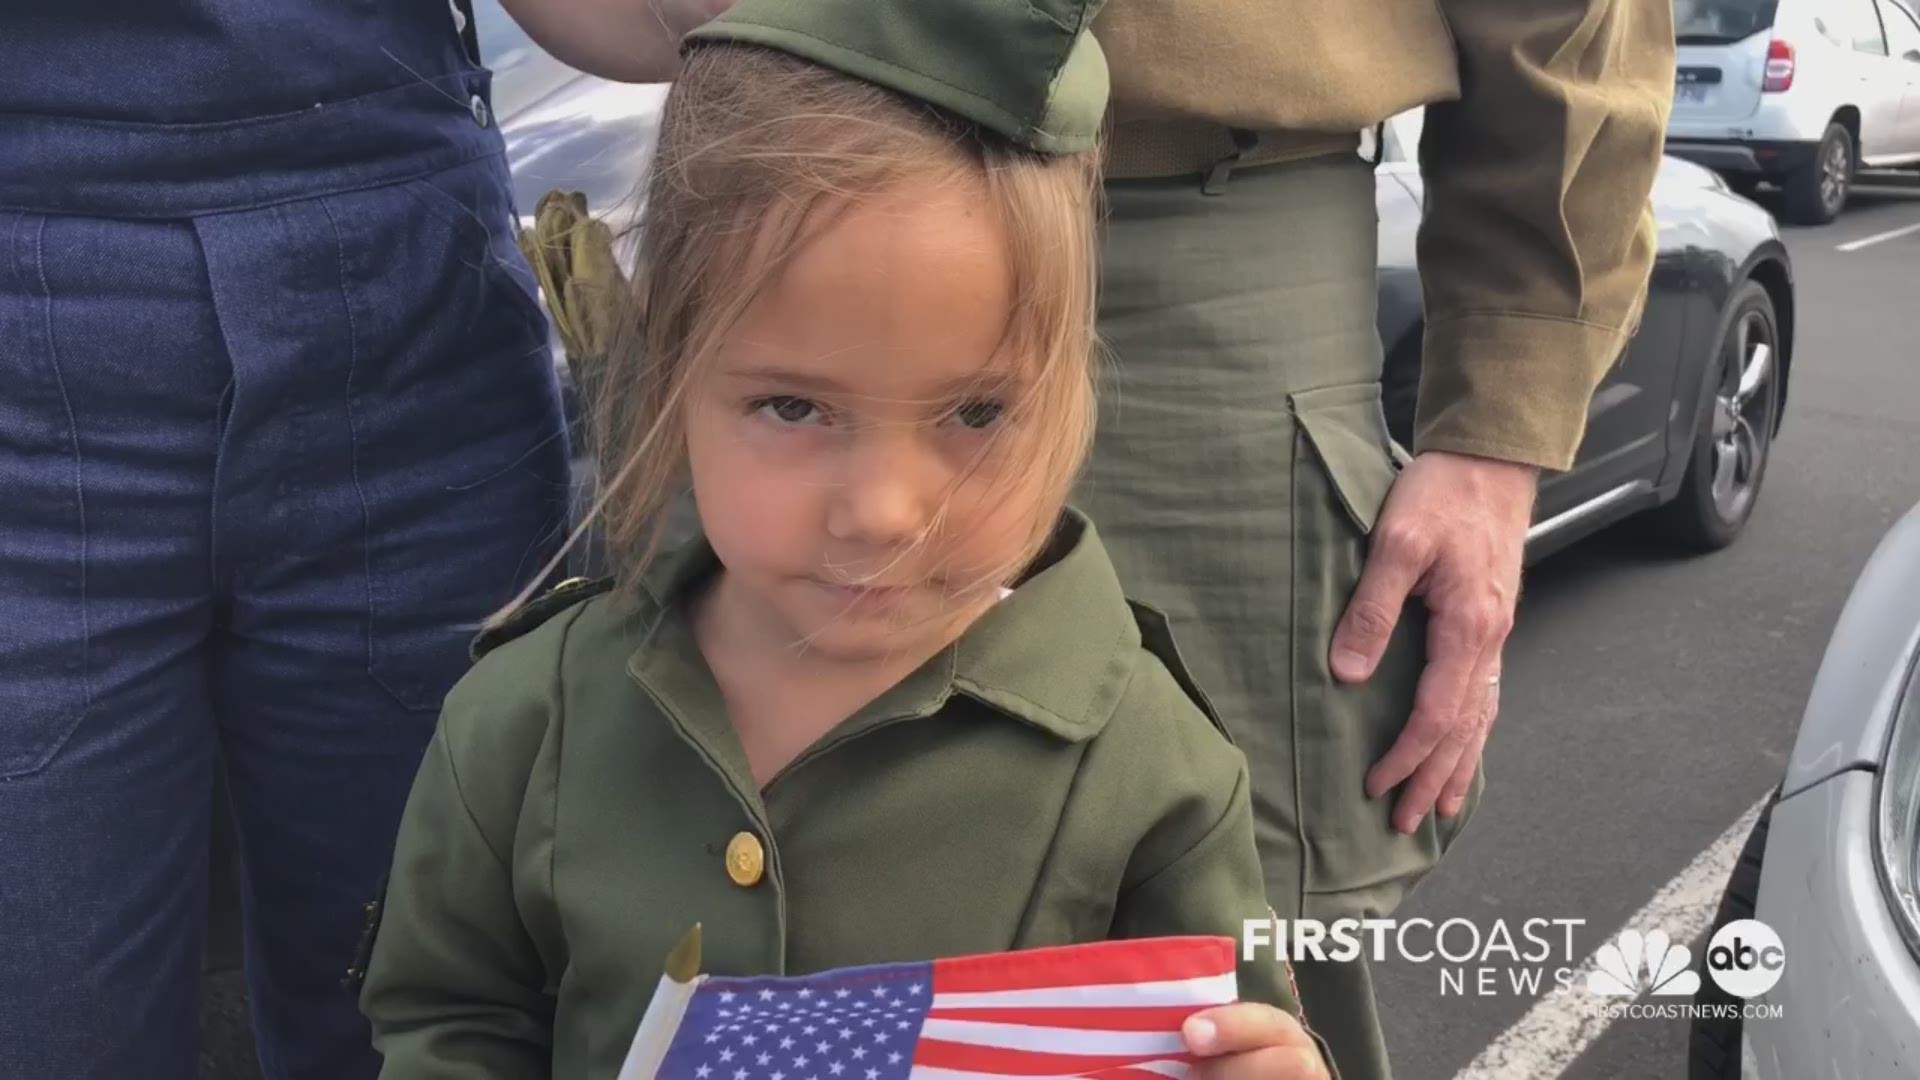 This 5-year-old girl is waving the American flag as a sign of respect. How cute!